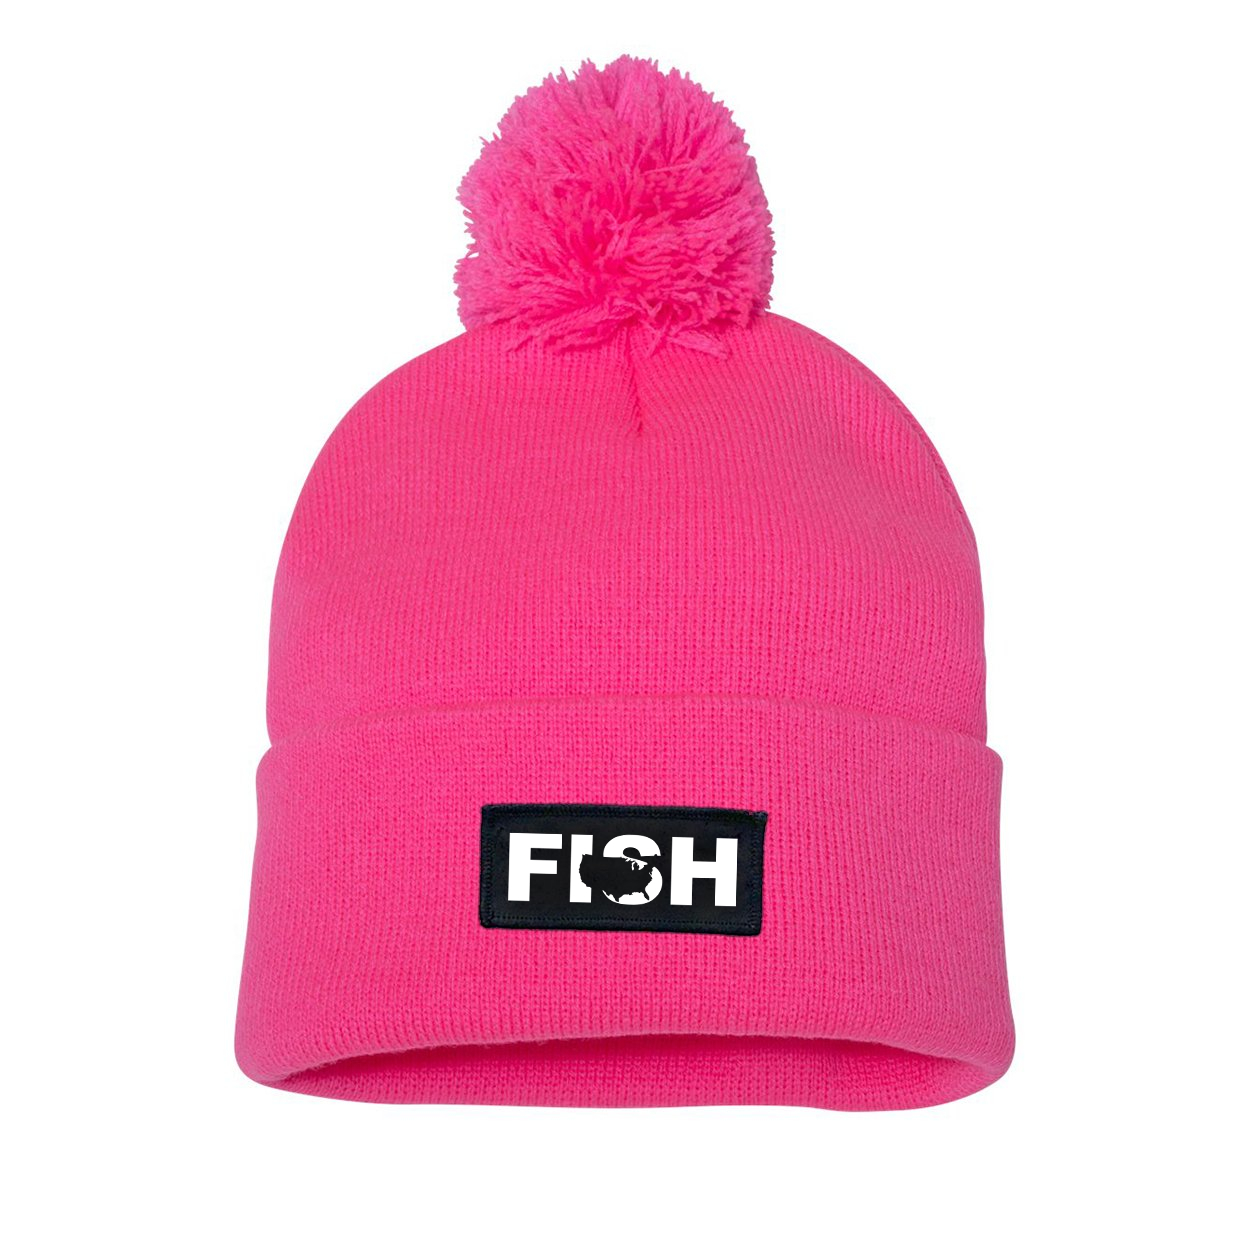 Fish United States Night Out Woven Patch Roll Up Pom Knit Beanie Pink (White Logo)